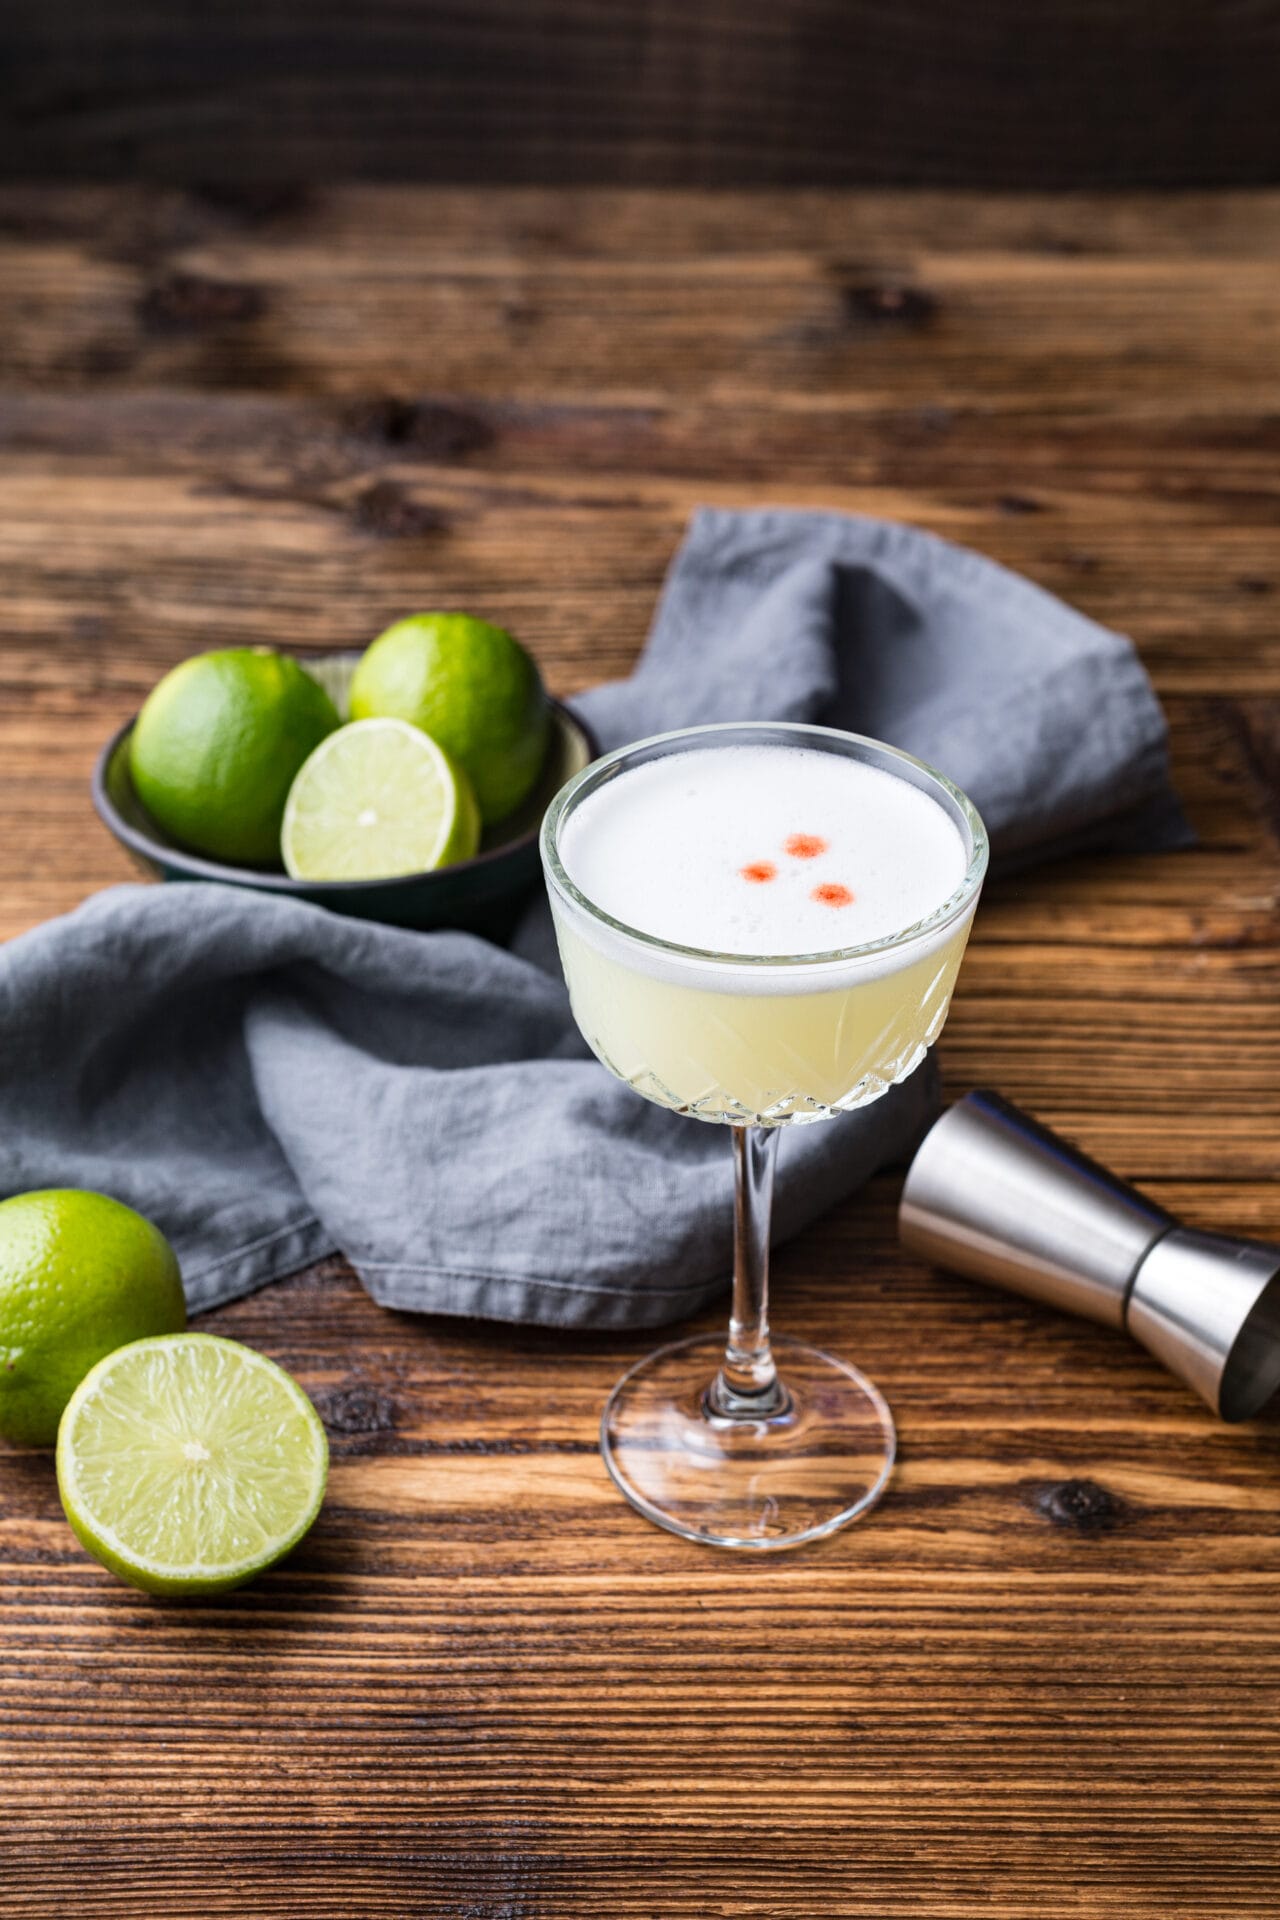 How to Make a Perfect Pisco Sour